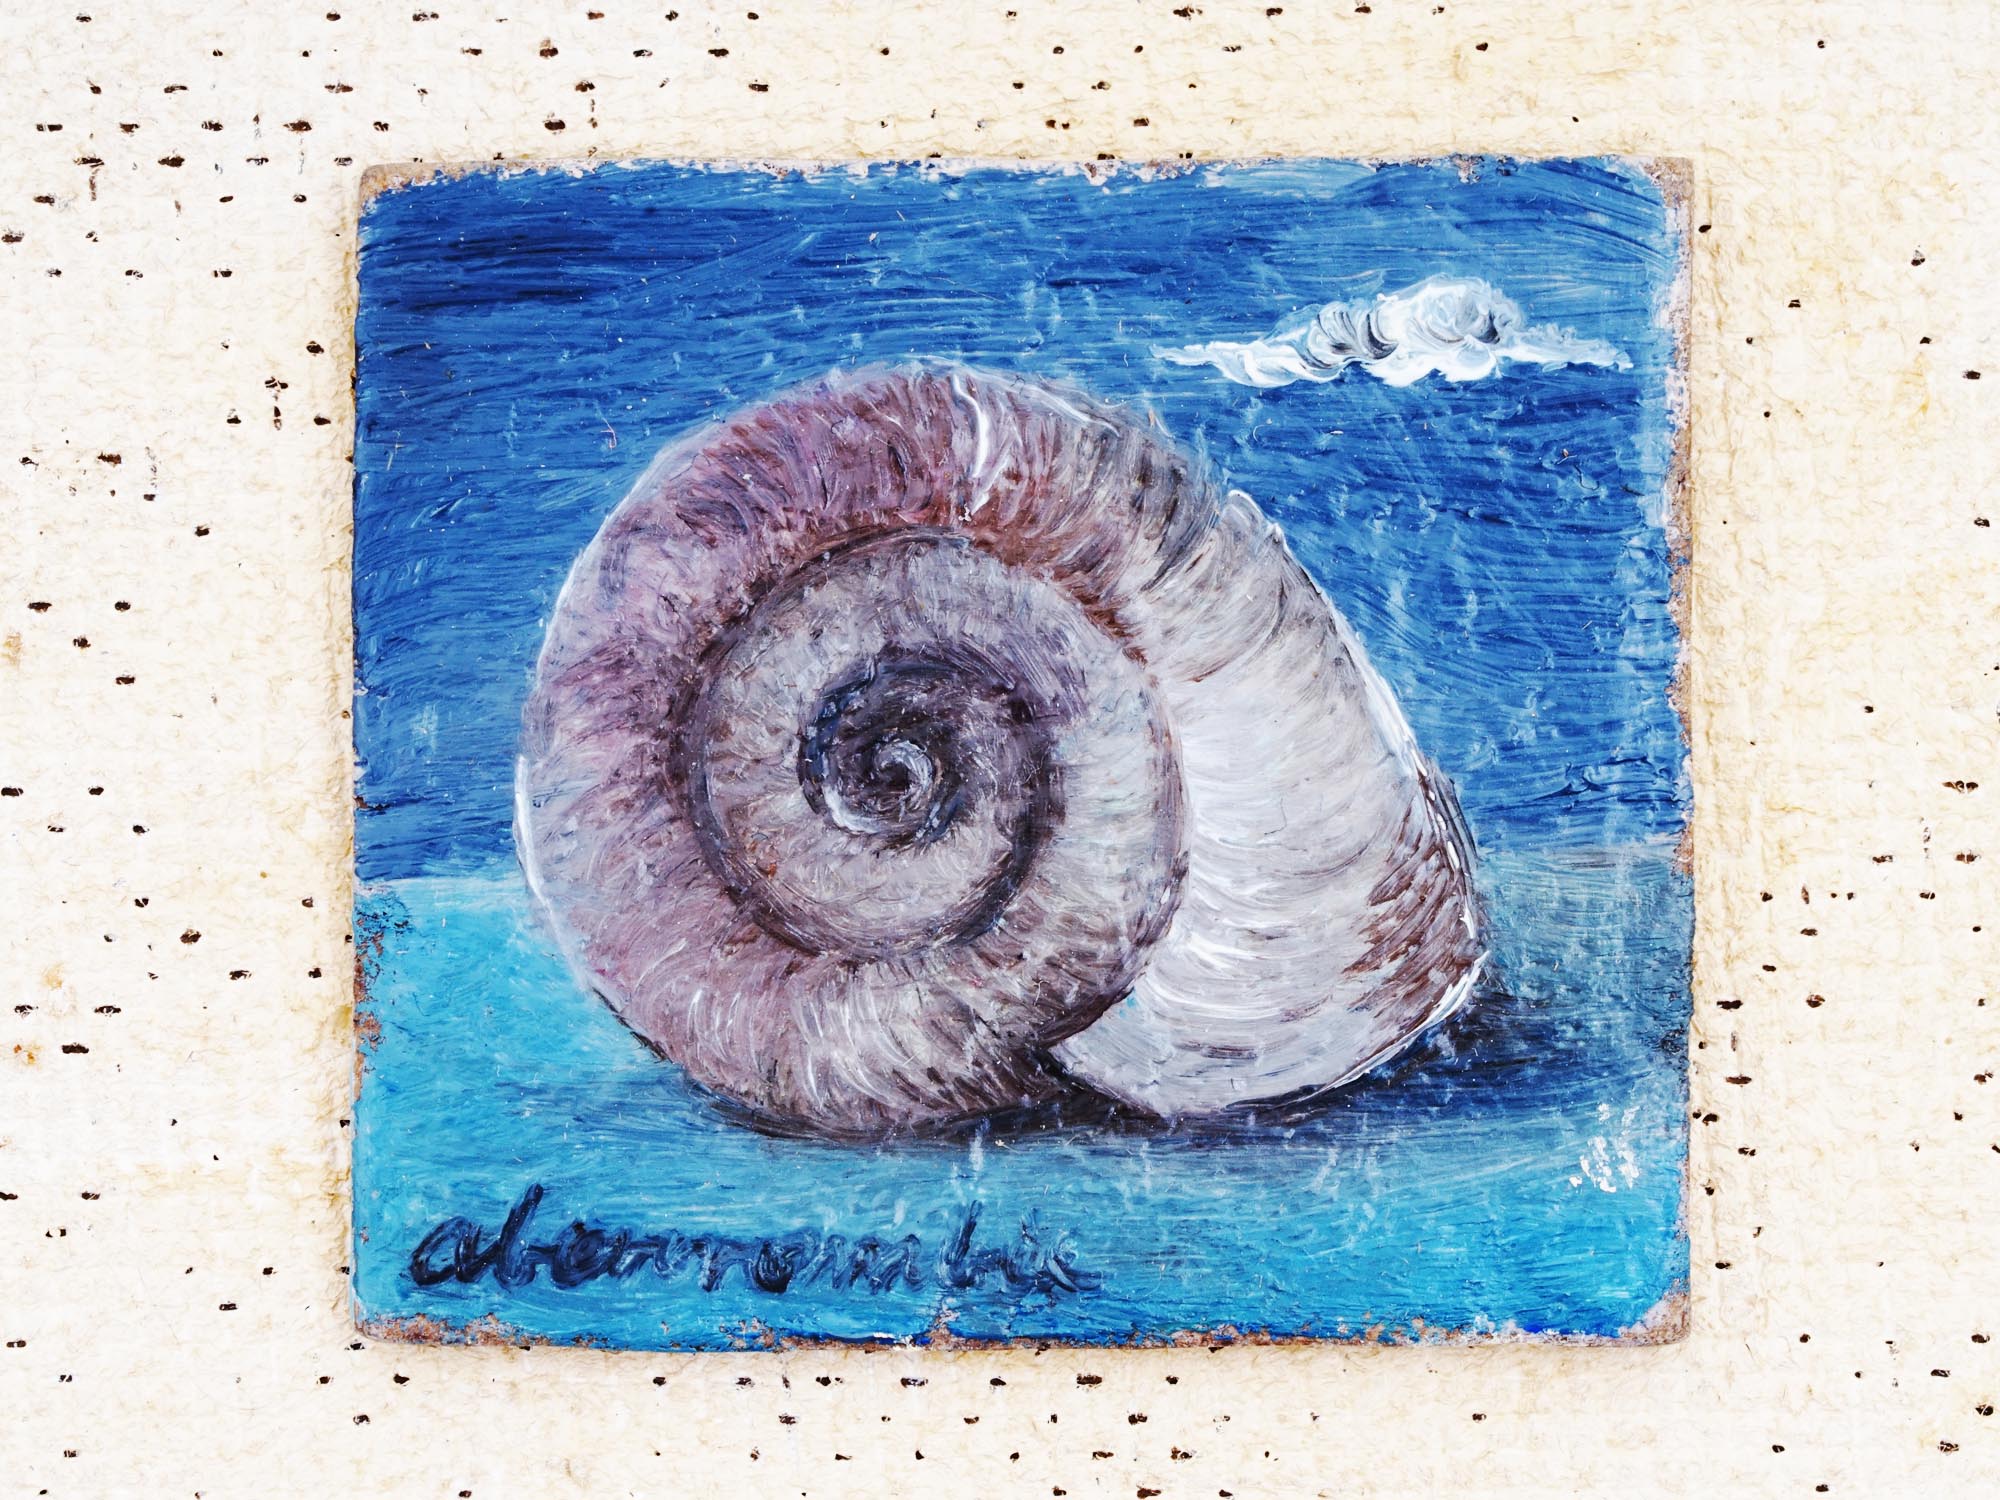 AMERICAN OIL PAINTING SNAIL BY GERTRUDE ABERCROMBIE PIC-1